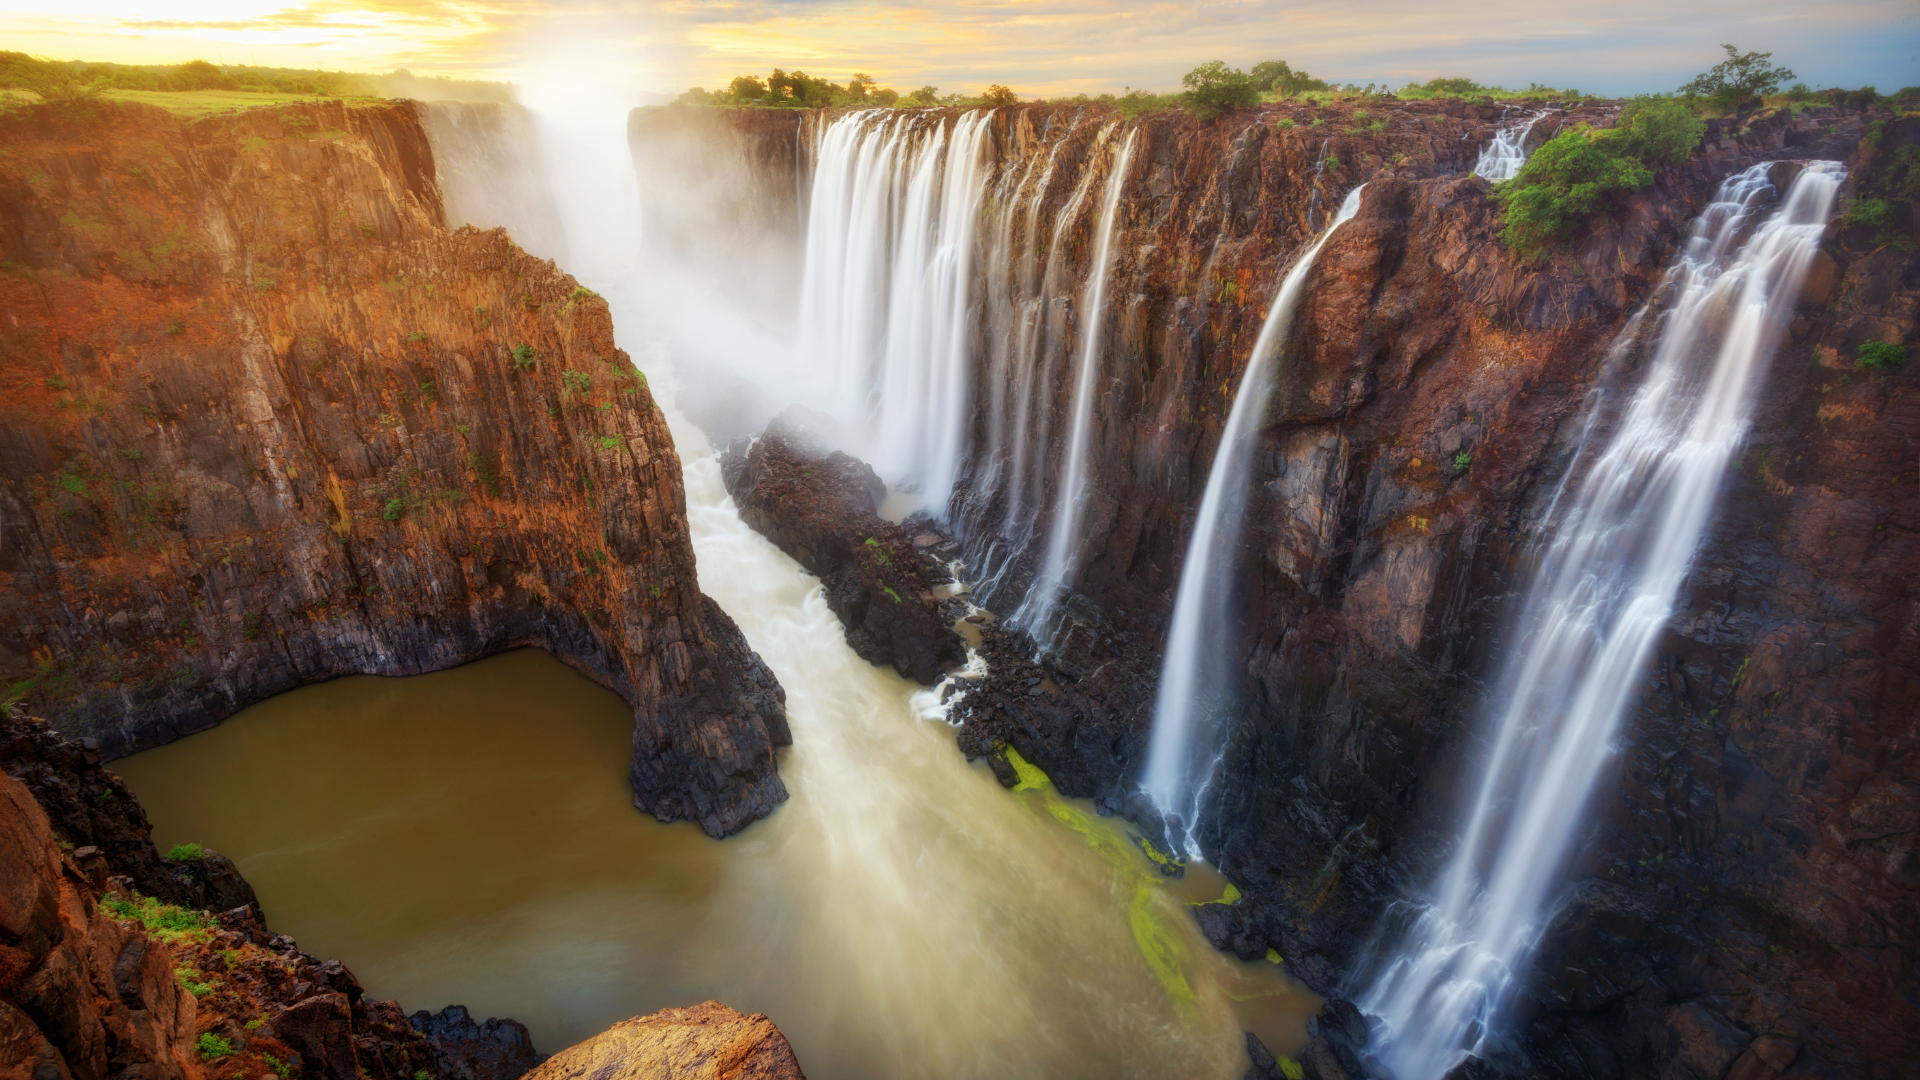 Victoria Falls, located on the border of Zambia and Zimbabwe, is one of the world's most awe-inspiring natural wonders. Feel the mist on your face and be captivated by the thunderous roar of the Falls as millions of gallons of water cascade down the cliffs. Admire the breathtaking beauty, go on a thrilling white-water rafting adventure, or take a scenic helicopter ride for a panoramic view of this mesmerizing spectacle.